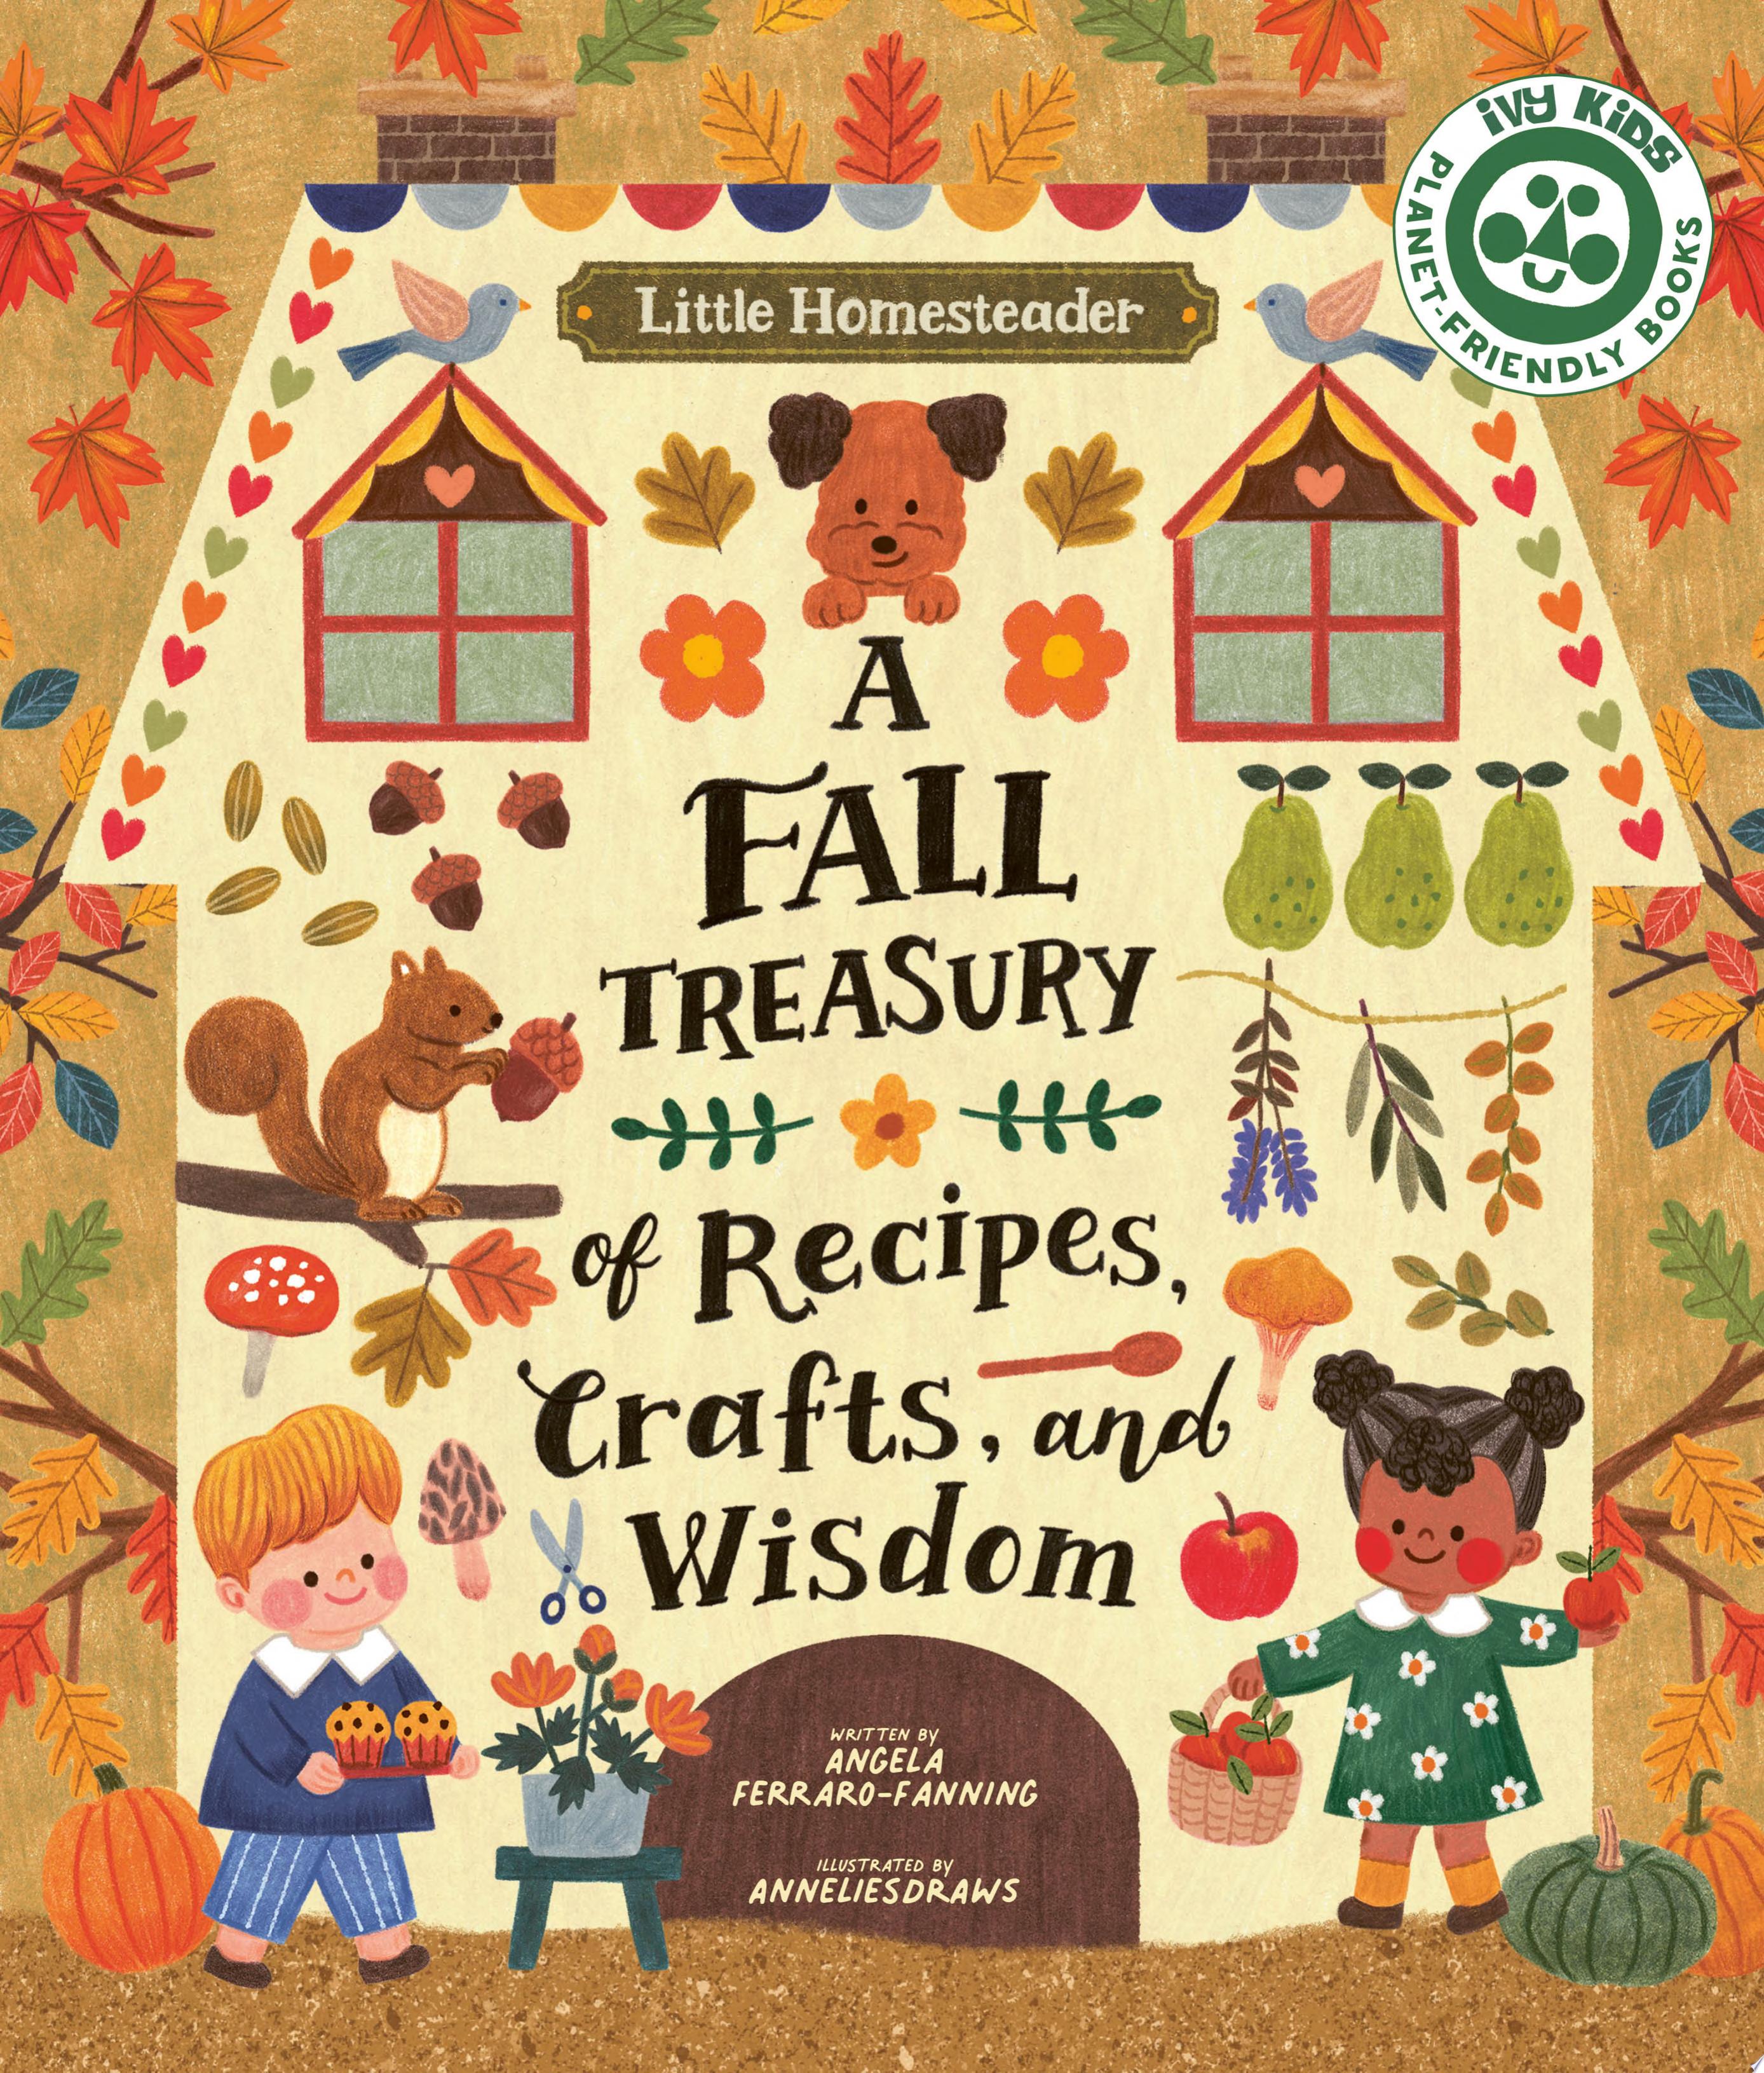 Image for "Little Homesteader: A Fall Treasury of Recipes, Crafts and Wisdom"